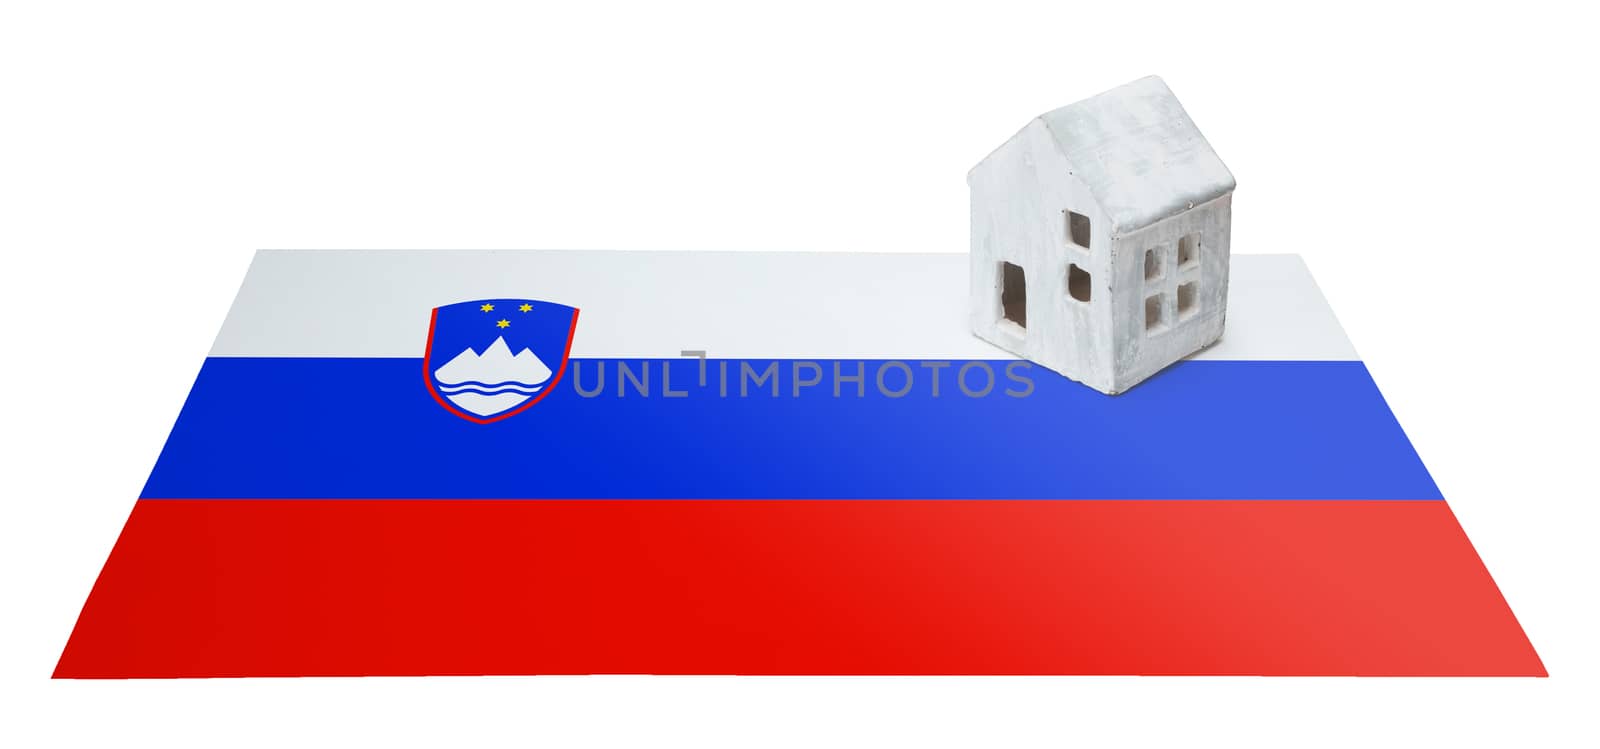 Small house on a flag - Slovenia by michaklootwijk